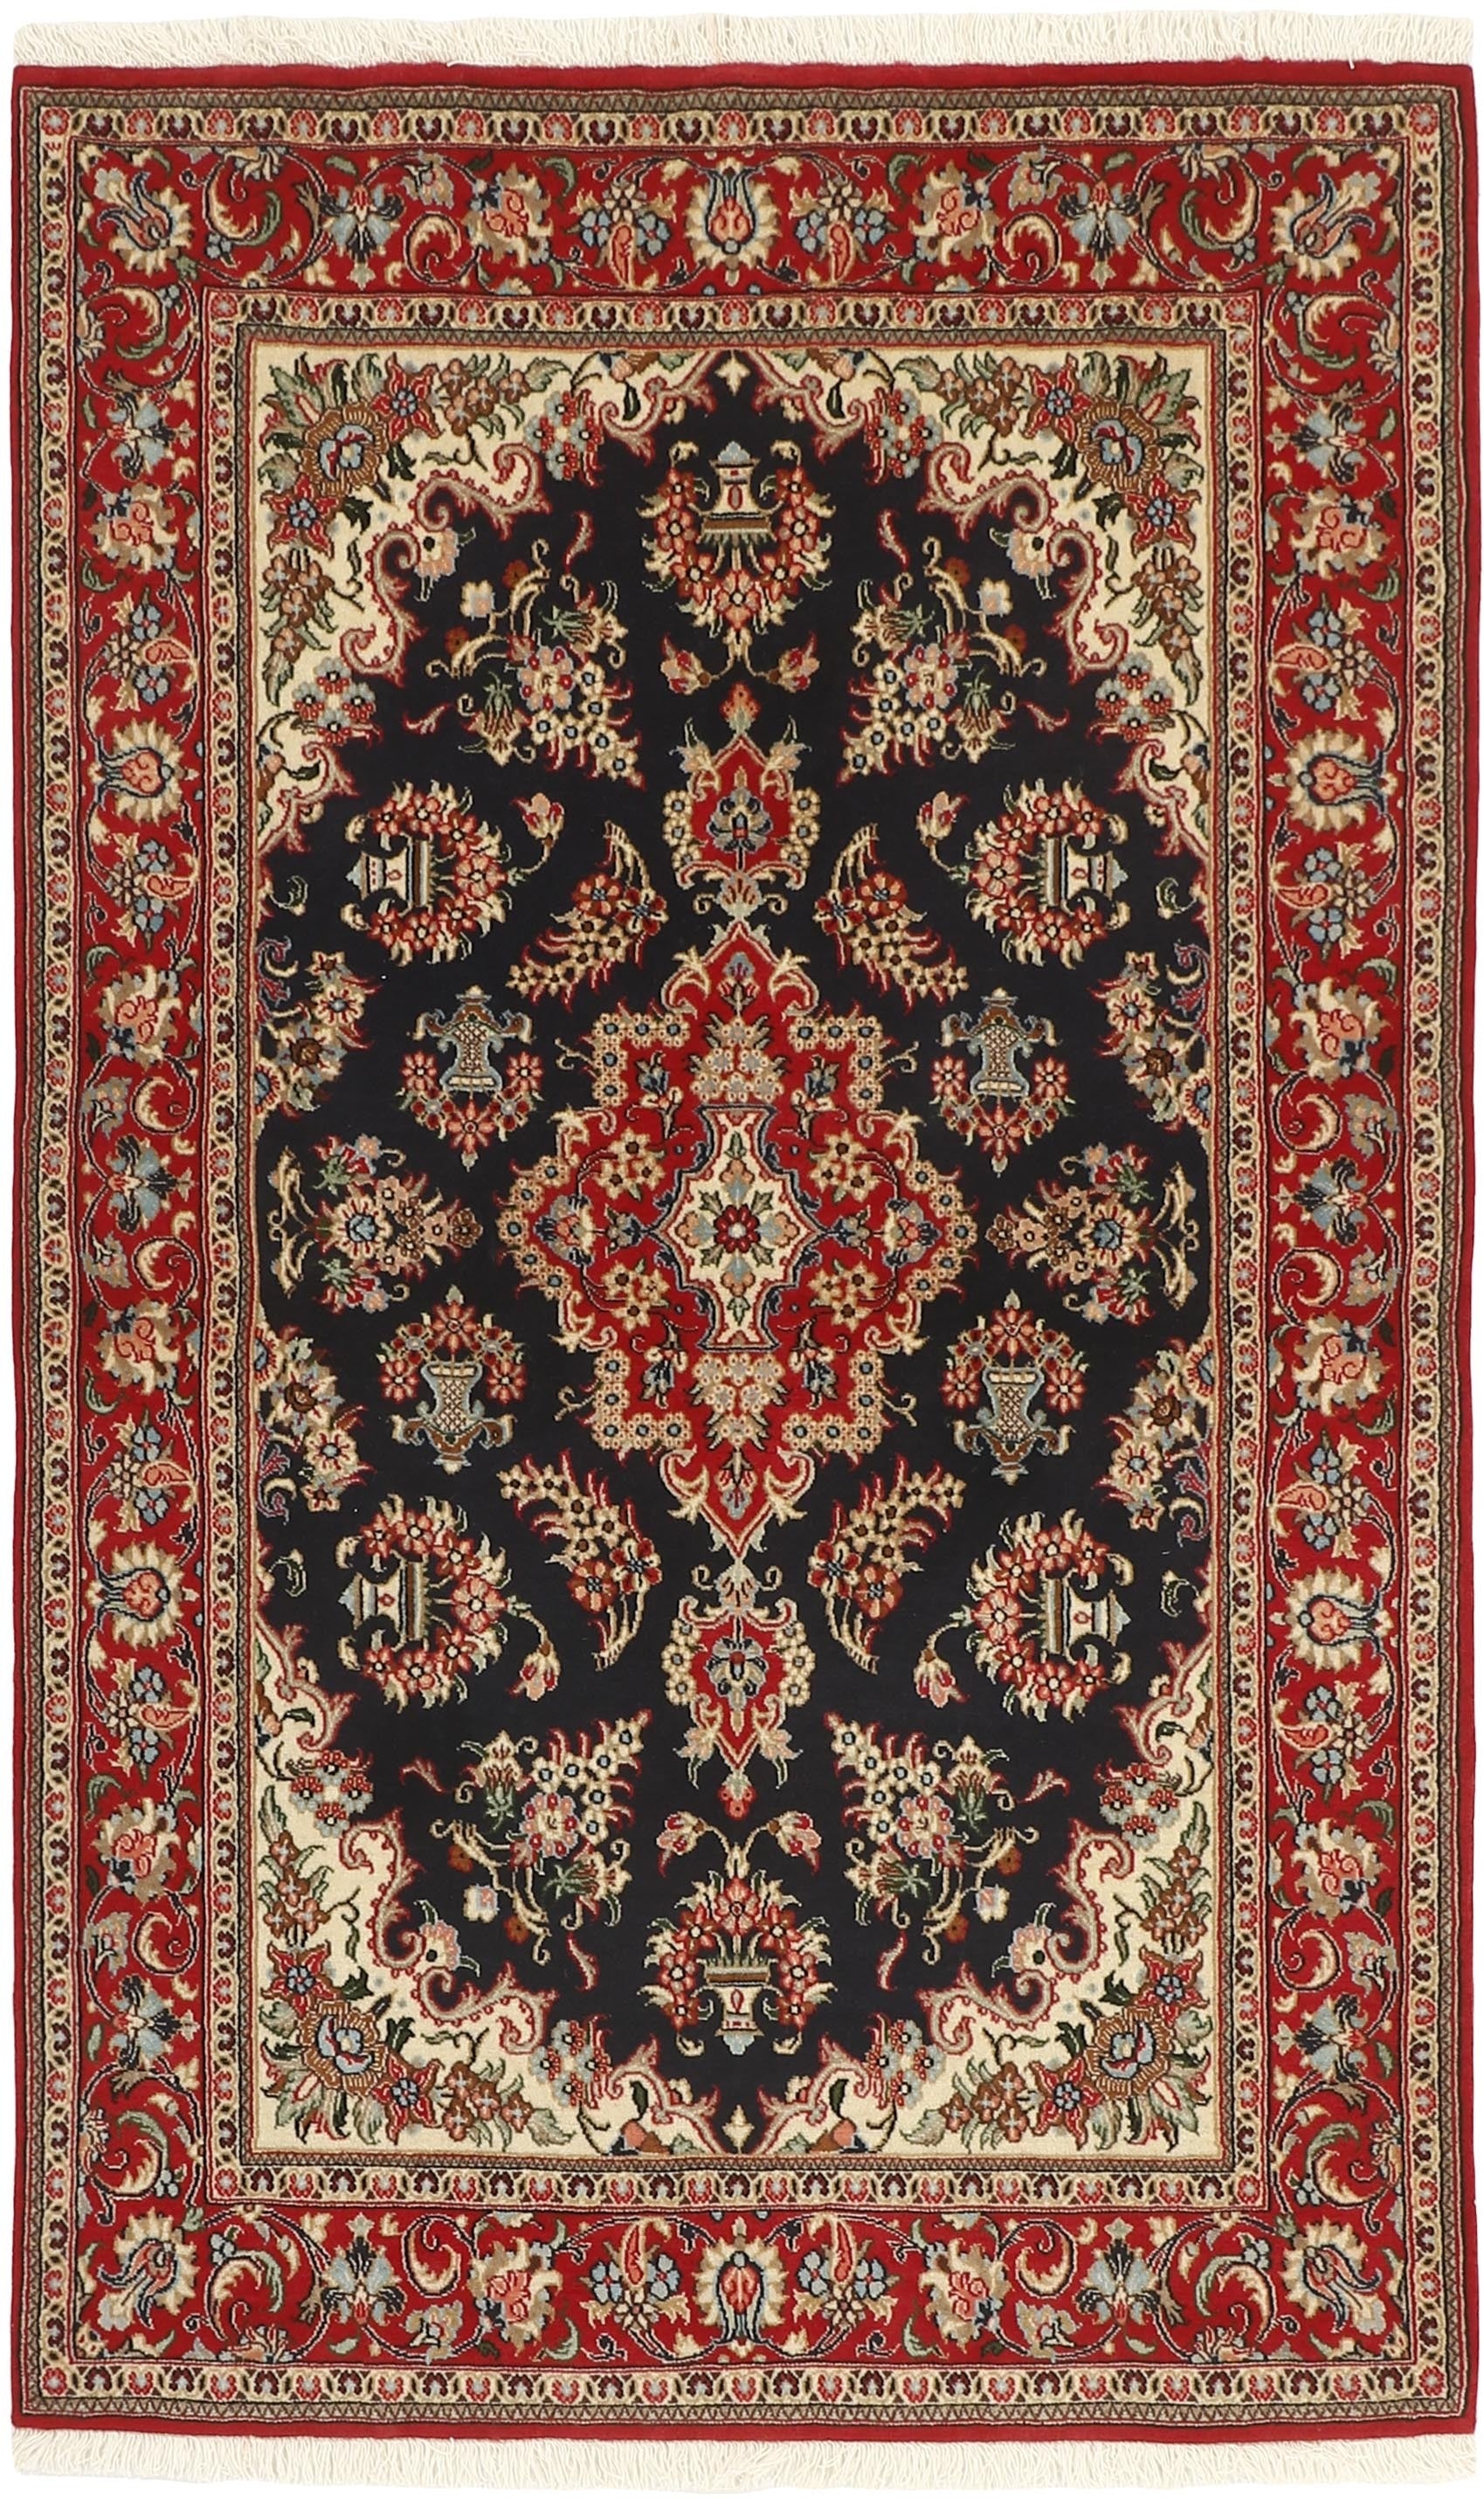 Authentic persian rug with a traditional floral design in red and beige